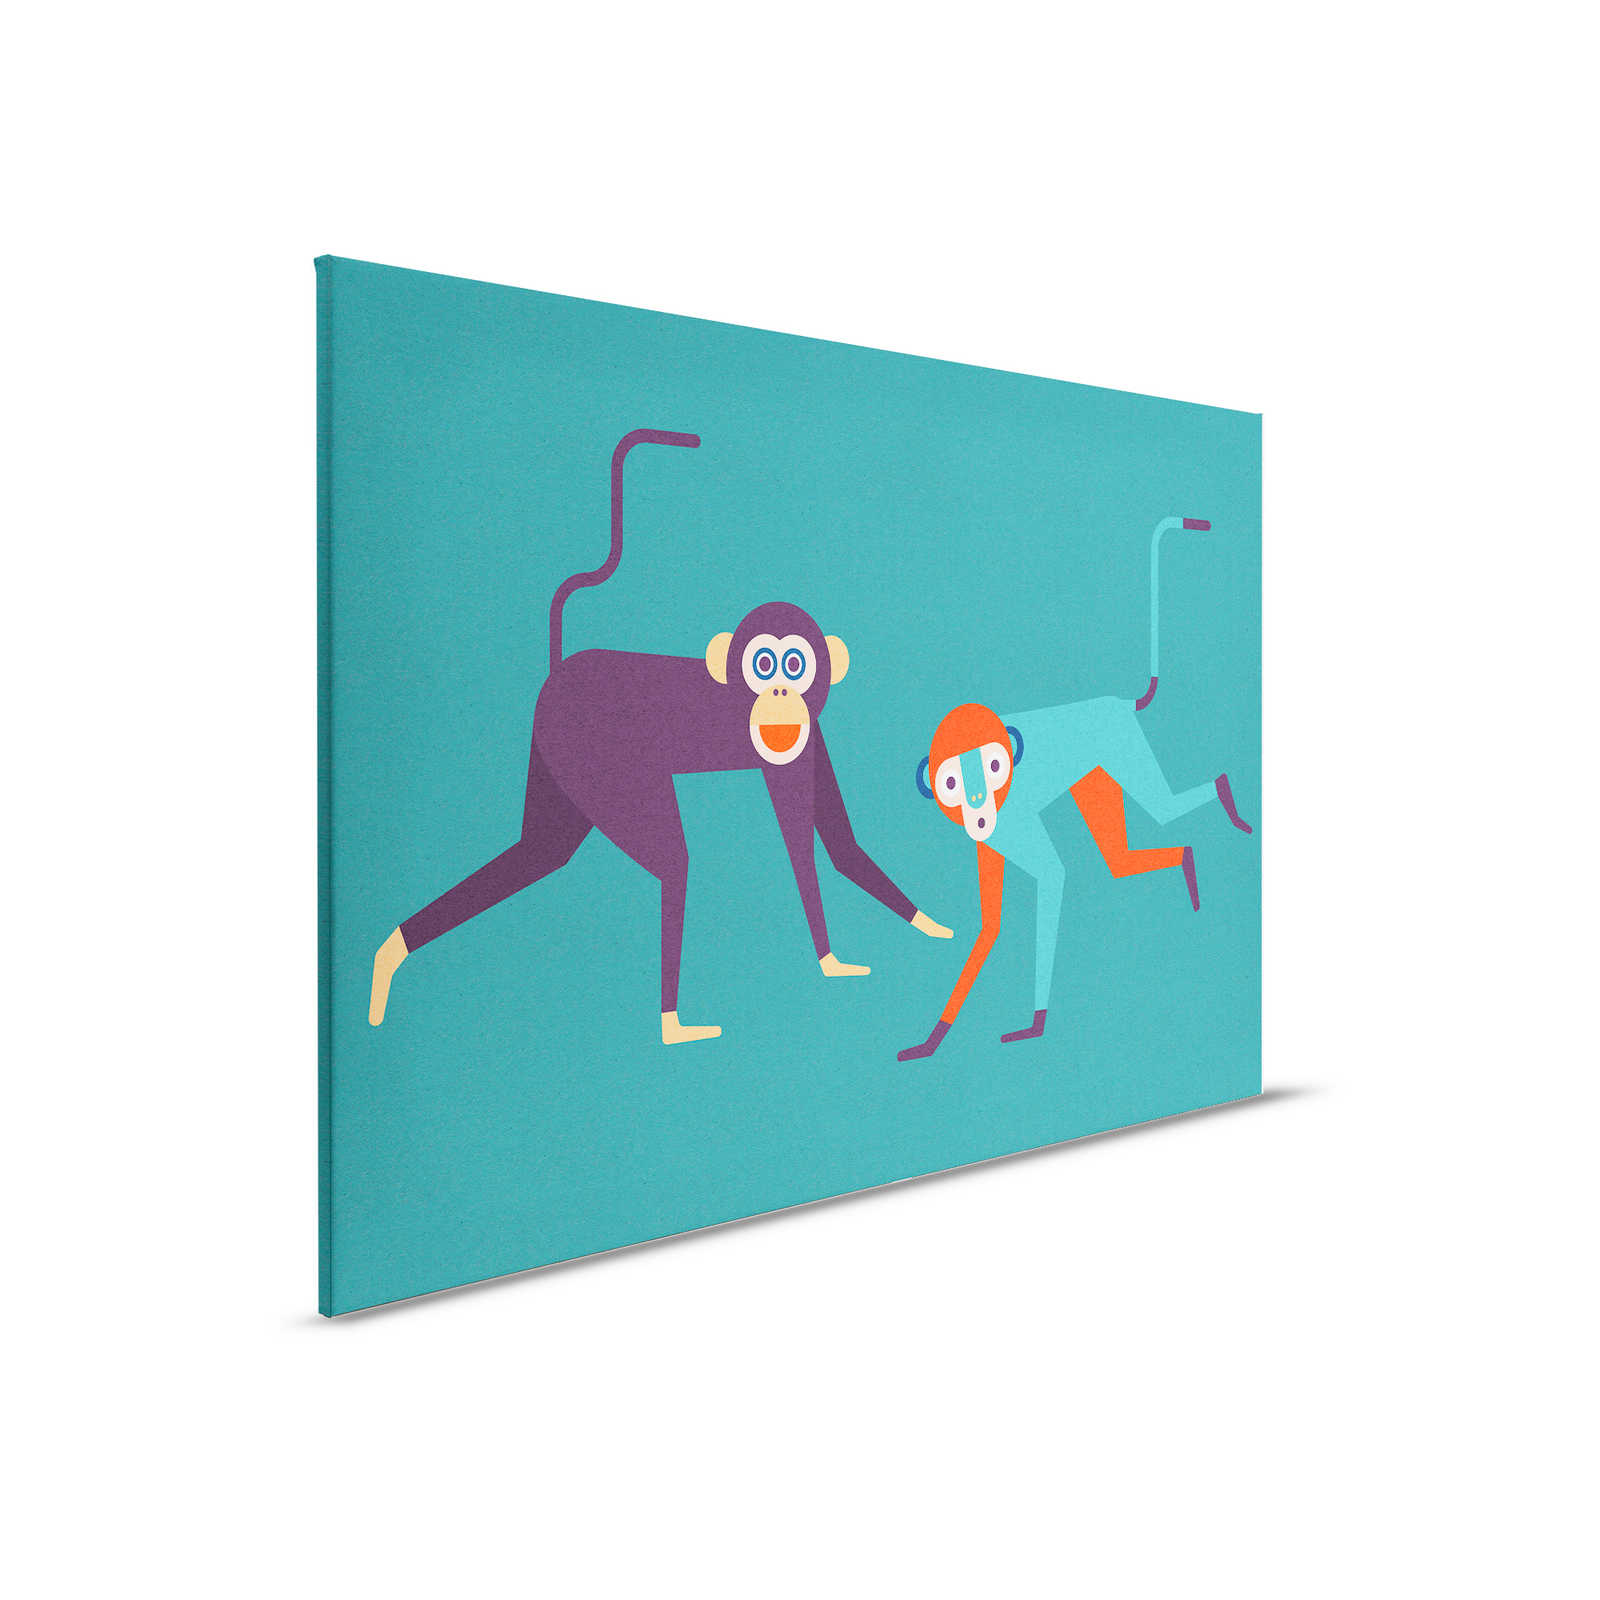         Monkey Business 1 - Canvas painting in cardboard structure, monkey gang in comic style - 0.90 m x 0.60 m
    